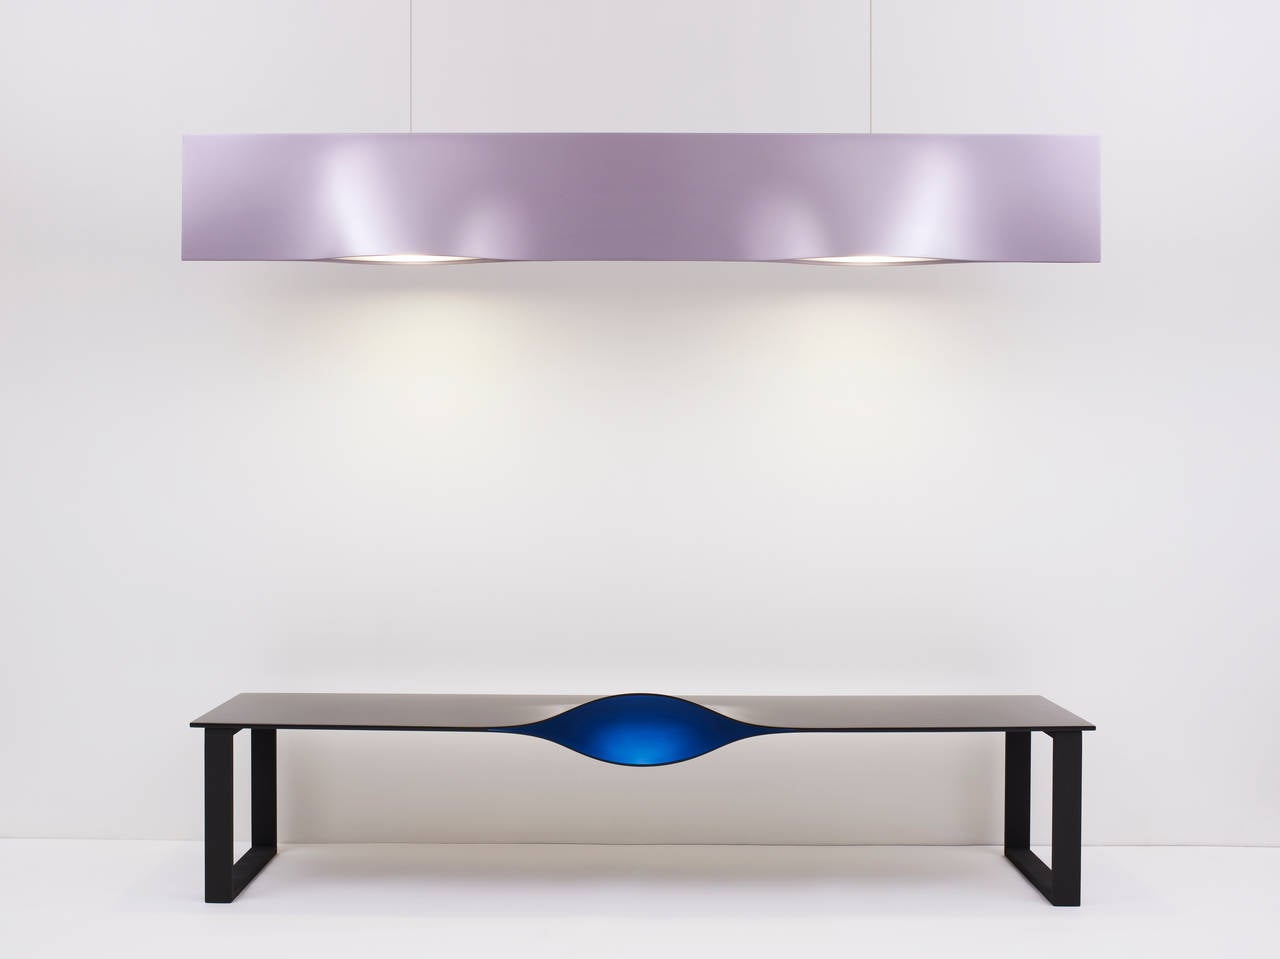 ‘Matrice 02’ is a true work of art: A fascinating and large hanging light resembling a sculpture. Added mystery is brought by lacquered fiberglass, the reflections of which look like deep water. A stunning piece designed and produced by the creative